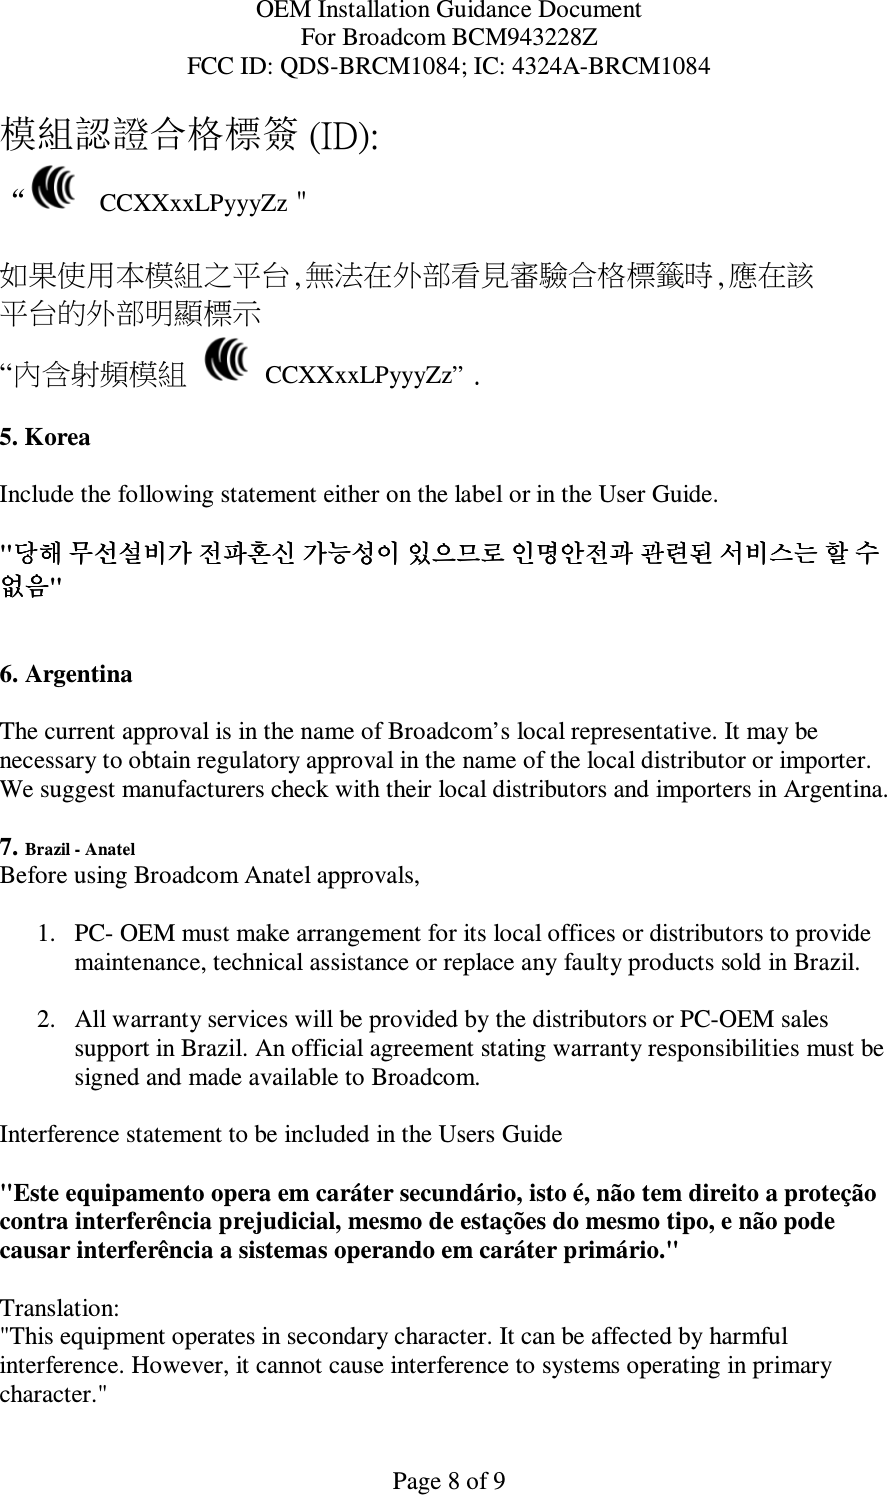 OEM Installation Guidance Document For Broadcom BCM943228Z FCC ID: QDS-BRCM1084; IC: 4324A-BRCM1084  Page 8 of 9 模組認證合格標簽 (ID): “   CCXXxxLPyyyZz＂  如果使用本模組之平台,無法在外部看見審驗合格標籤時,應在該 平台的外部明顯標示 “內含射頻模組   CCXXxxLPyyyZz” .  5. Korea  Include the following statement either on the label or in the User Guide.   &quot;당해당해당해당해 무선설비가무선설비가무선설비가무선설비가 전파혼신전파혼신전파혼신전파혼신 가능성이가능성이가능성이가능성이 있으므로있으므로있으므로있으므로 인명안전과인명안전과인명안전과인명안전과 관련된관련된관련된관련된 서비스는서비스는서비스는서비스는 할할할할 수수수수 없없없없음음음음&quot;   6. Argentina   The current approval is in the name of Broadcom’s local representative. It may be necessary to obtain regulatory approval in the name of the local distributor or importer. We suggest manufacturers check with their local distributors and importers in Argentina.  7. Brazil - Anatel  Before using Broadcom Anatel approvals,   1. PC- OEM must make arrangement for its local offices or distributors to provide maintenance, technical assistance or replace any faulty products sold in Brazil.   2. All warranty services will be provided by the distributors or PC-OEM sales support in Brazil. An official agreement stating warranty responsibilities must be signed and made available to Broadcom.   Interference statement to be included in the Users Guide &quot;Este equipamento opera em caráter secundário, isto é, não tem direito a proteção contra interferência prejudicial, mesmo de estações do mesmo tipo, e não pode causar interferência a sistemas operando em caráter primário.&quot; Translation:  &quot;This equipment operates in secondary character. It can be affected by harmful interference. However, it cannot cause interference to systems operating in primary character.&quot;  